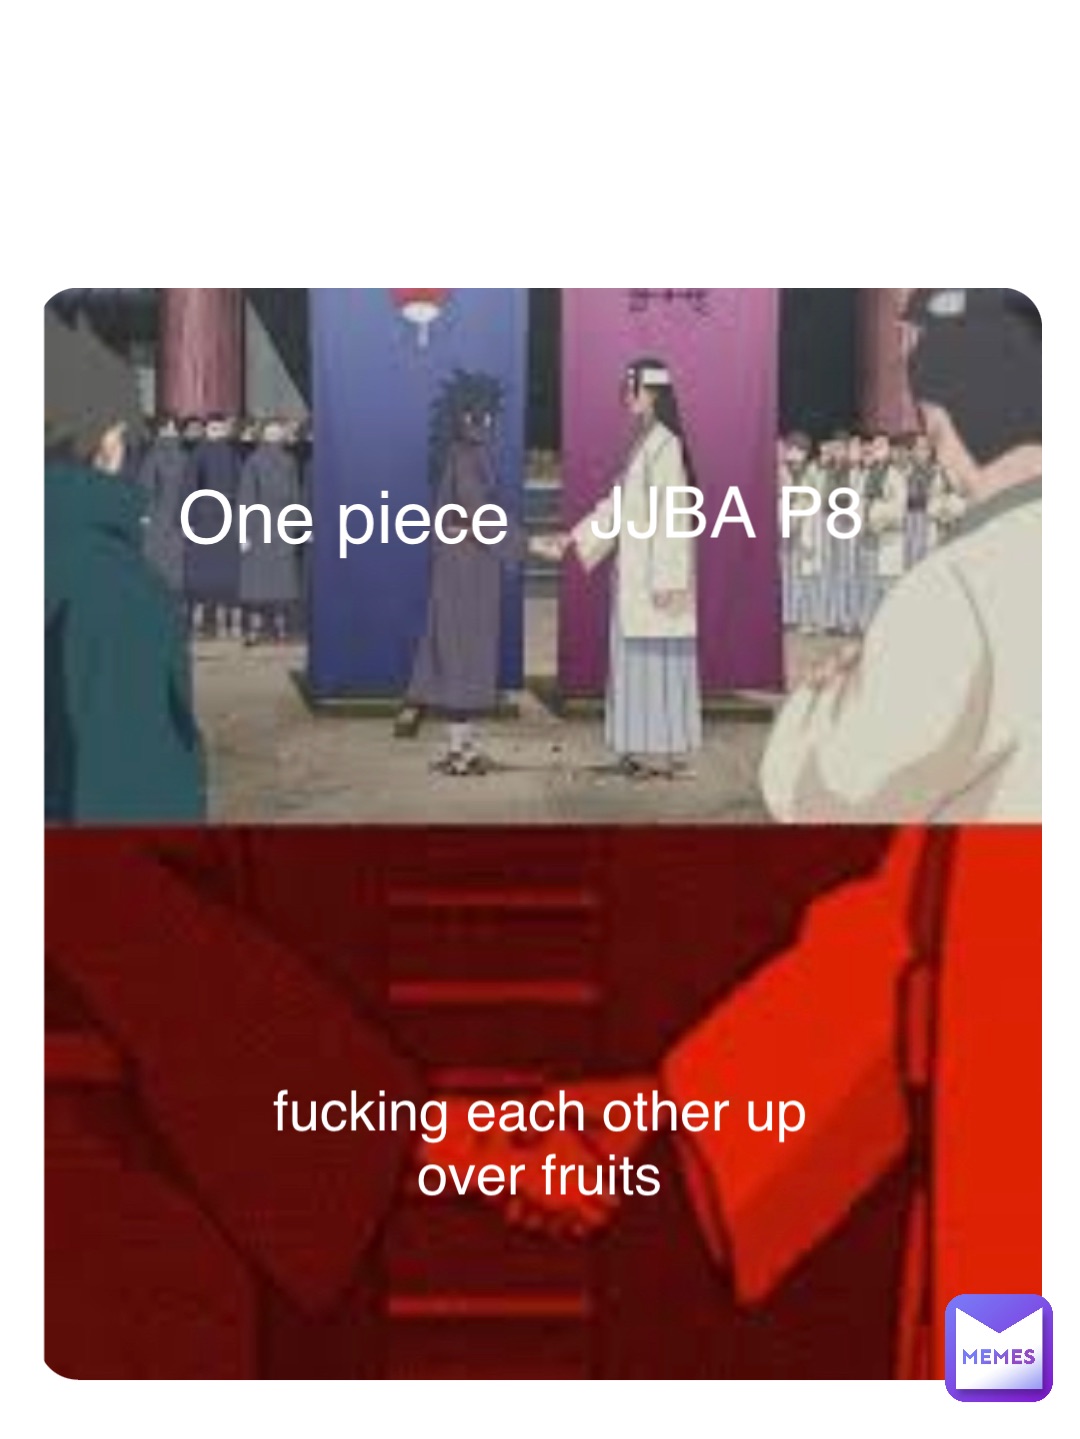 Double tap to edit One piece JJBA P8 fucking each other up 
over fruits